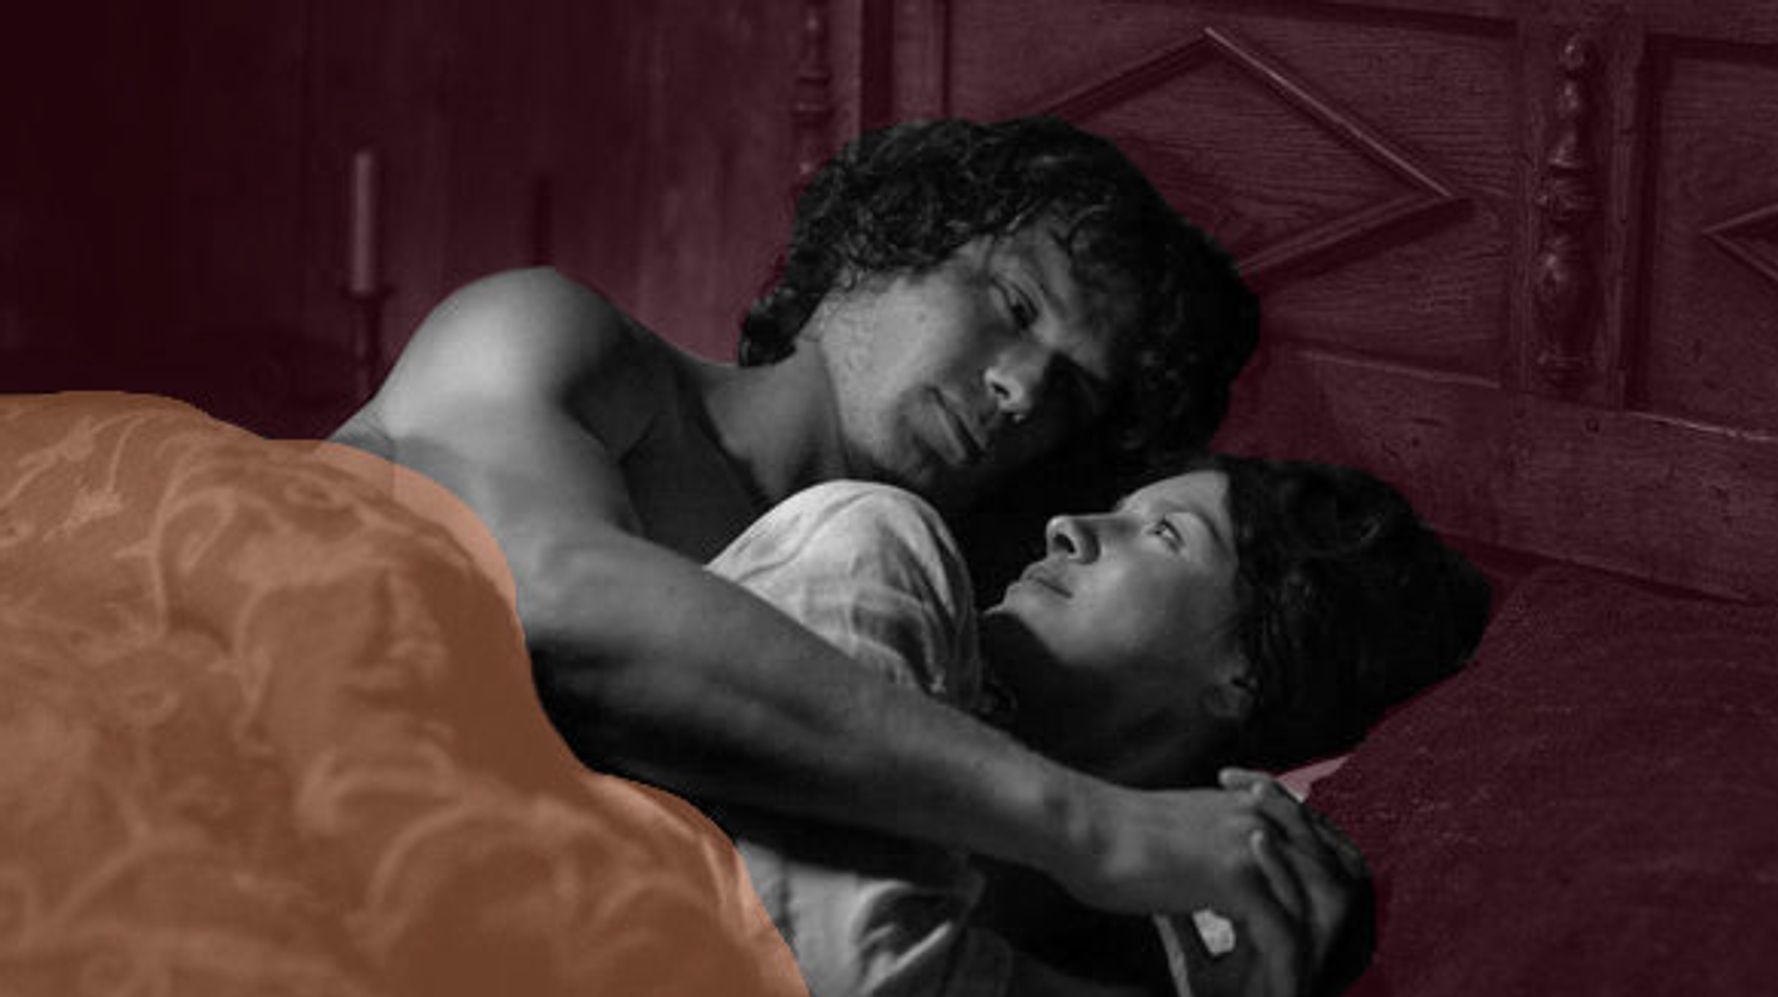 Outlander' Is The Official TV Show Of Frisky Couples Who Just Want To F**k  | HuffPost Entertainment